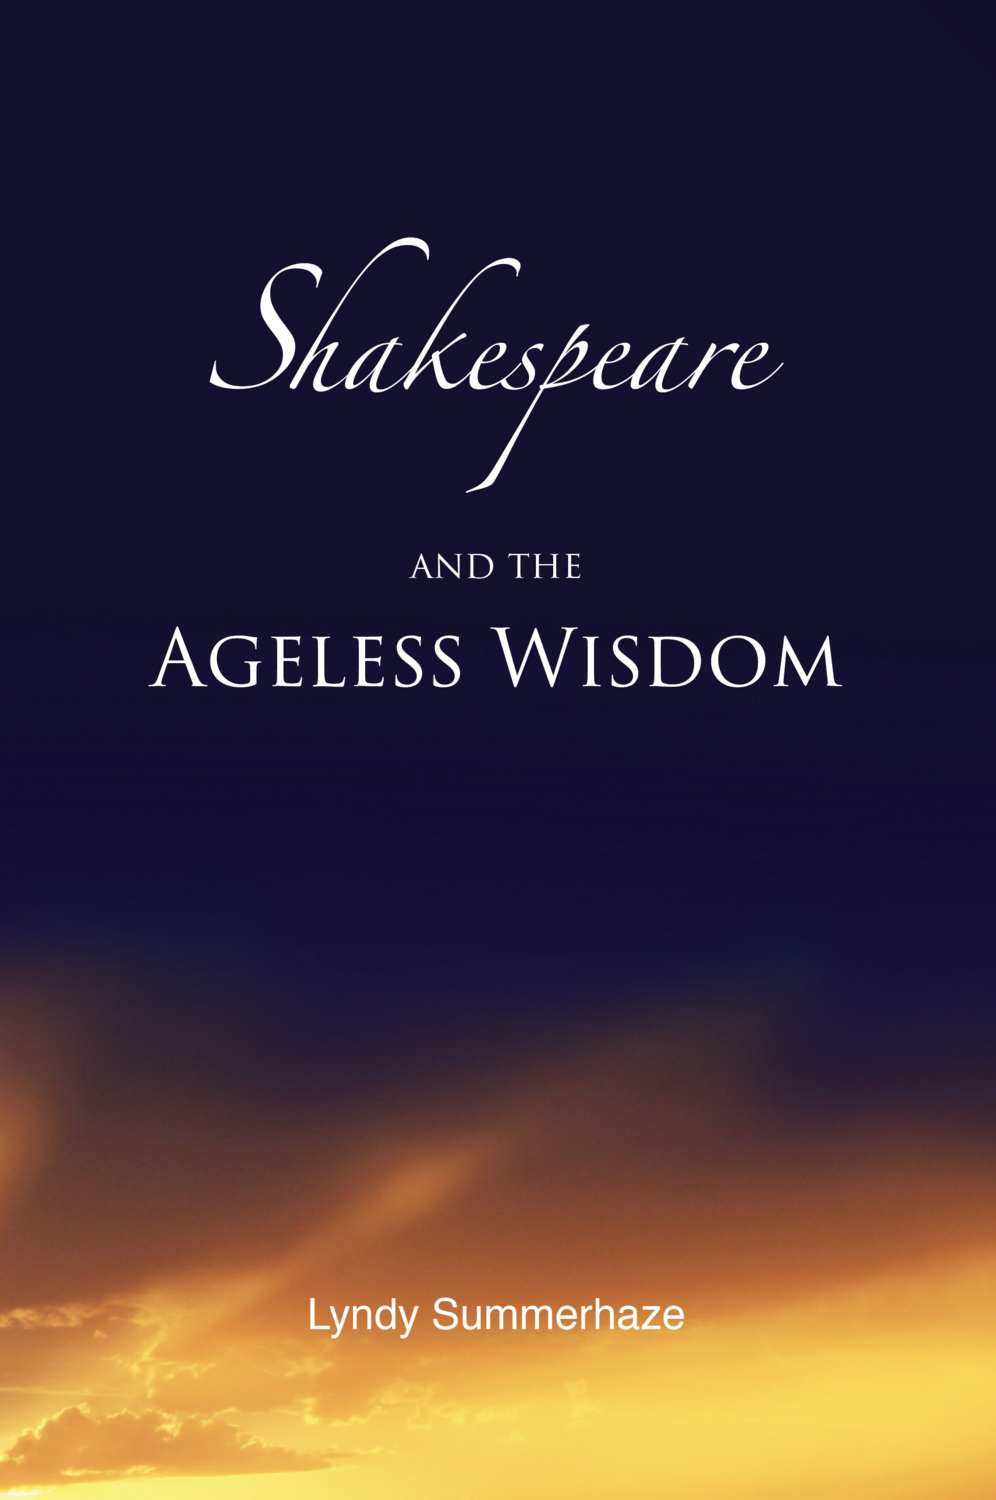 Shakespeare - and the Ageless Wisdom